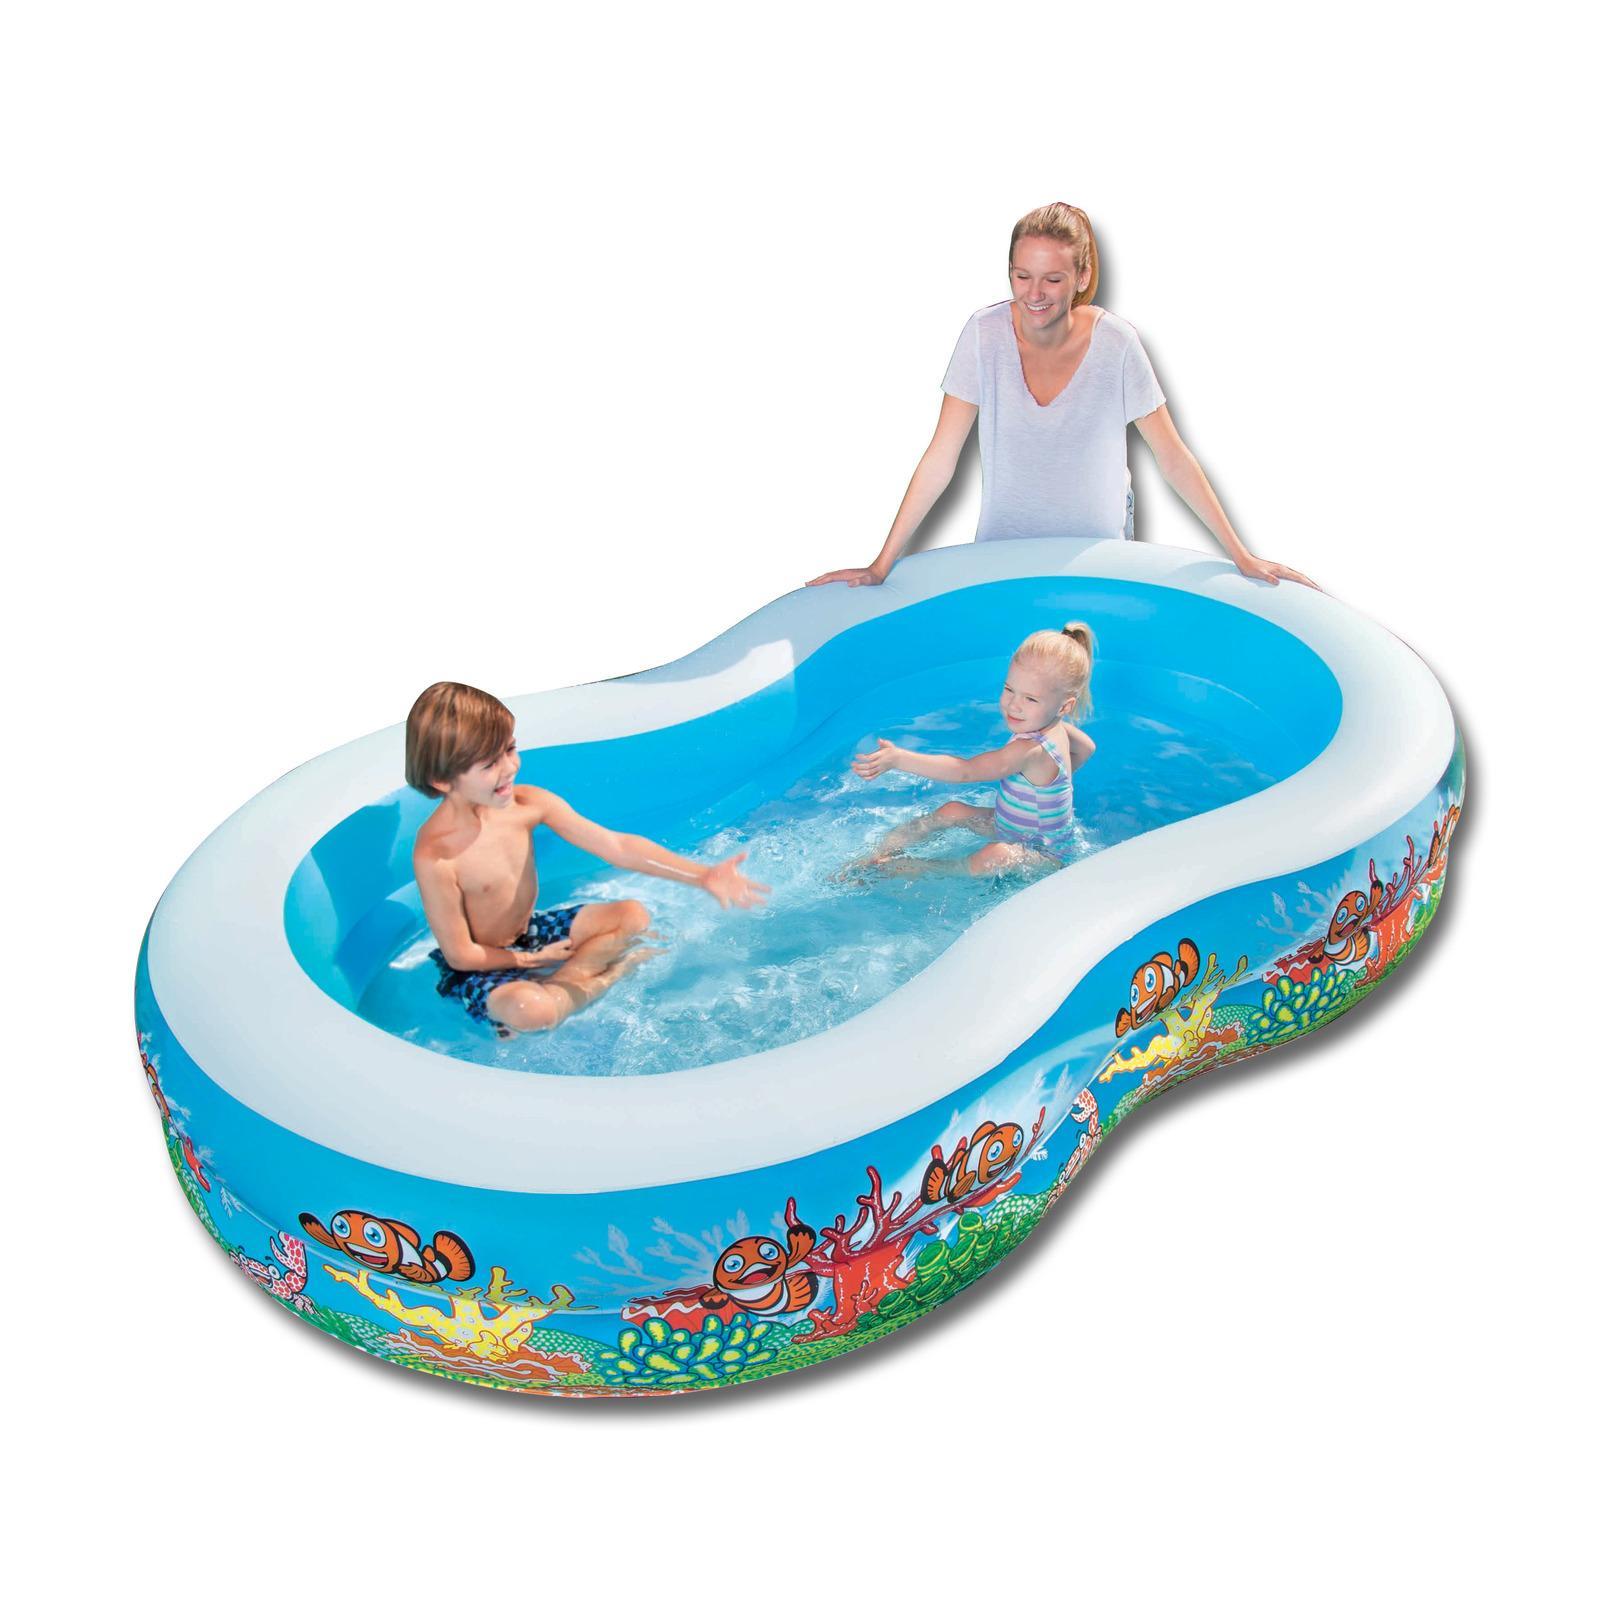 Bestway® Swimming Pool Above Ground Inflatable Family Fun 262cm x 157cm x 46cm